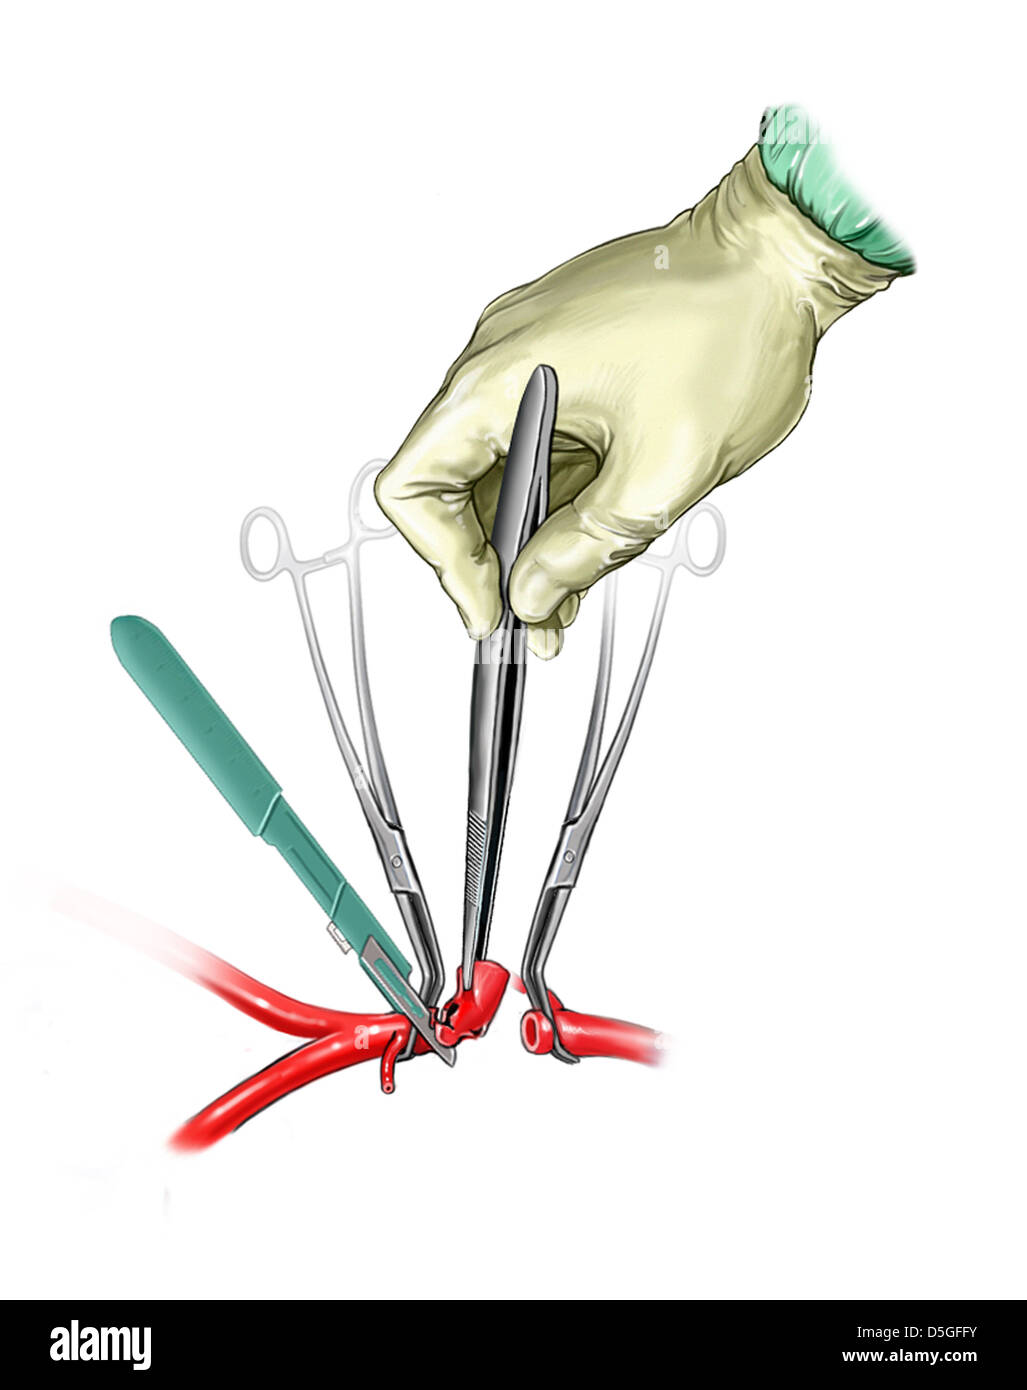 Resection of Injured Segment of Abdominal Aorta Stock Photo